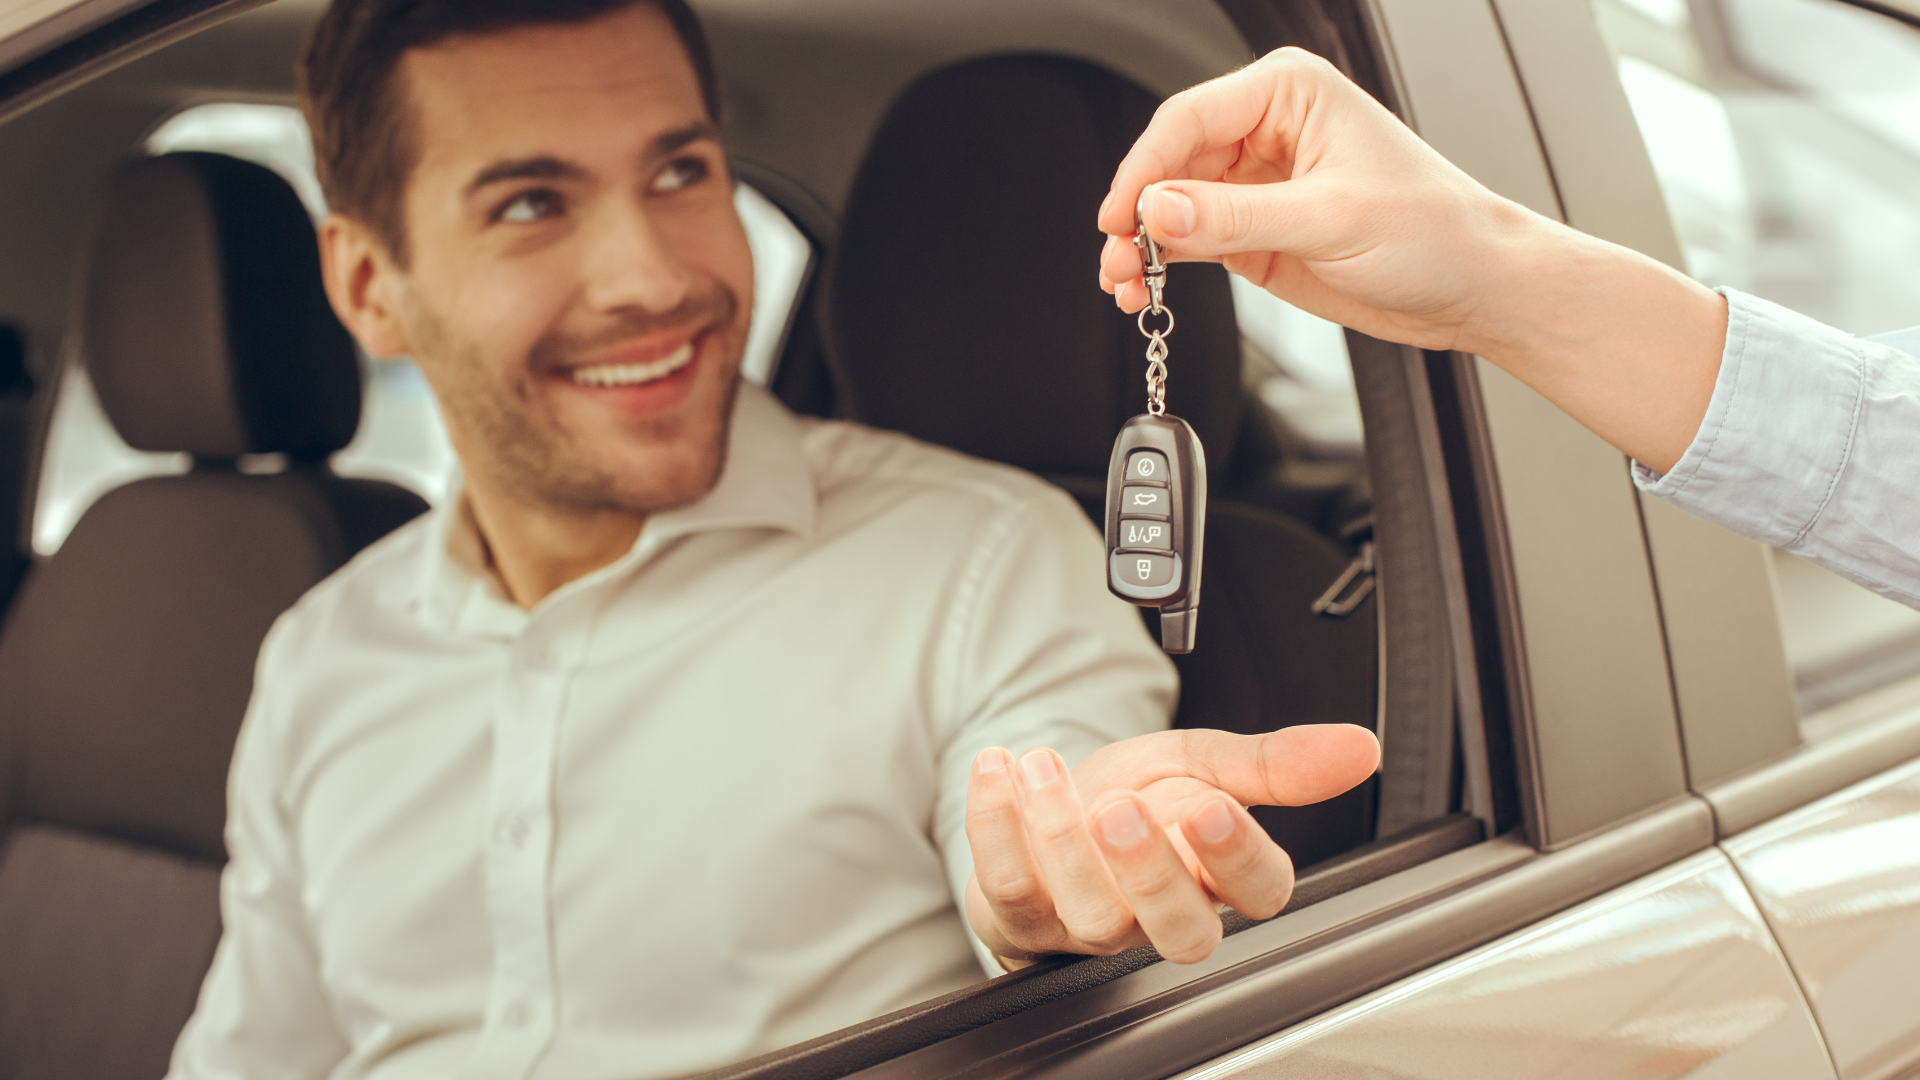 Vehicle Test Drives: Why Dealers Need a Written Agreement